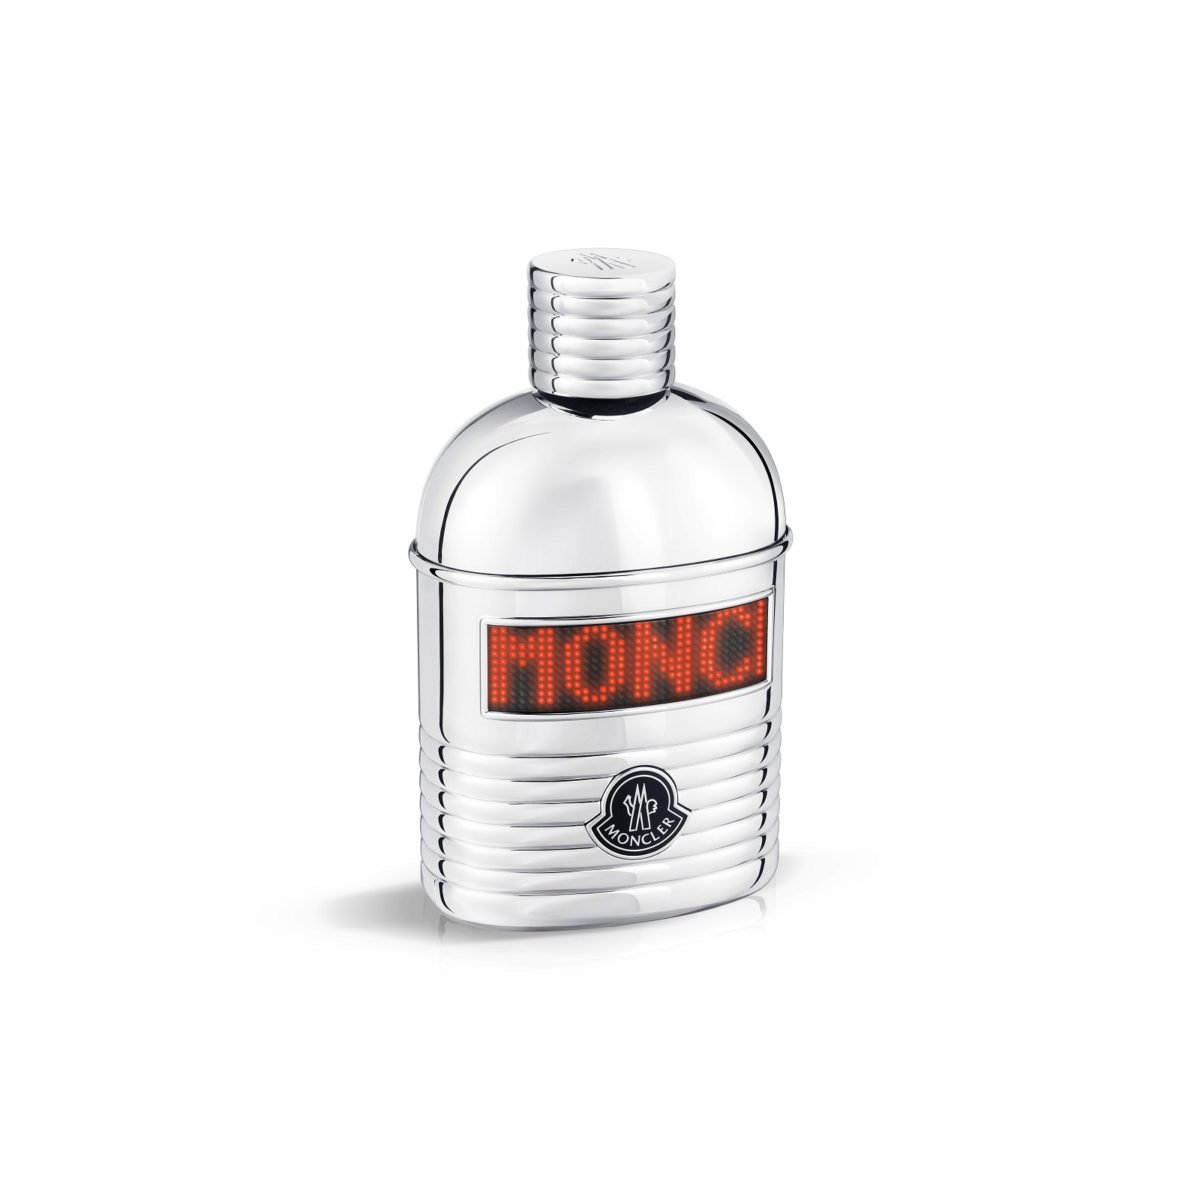 Fragrance Friday: Moncler Pour Homme Is More Than Its Kitschy Reflective LED Bottle